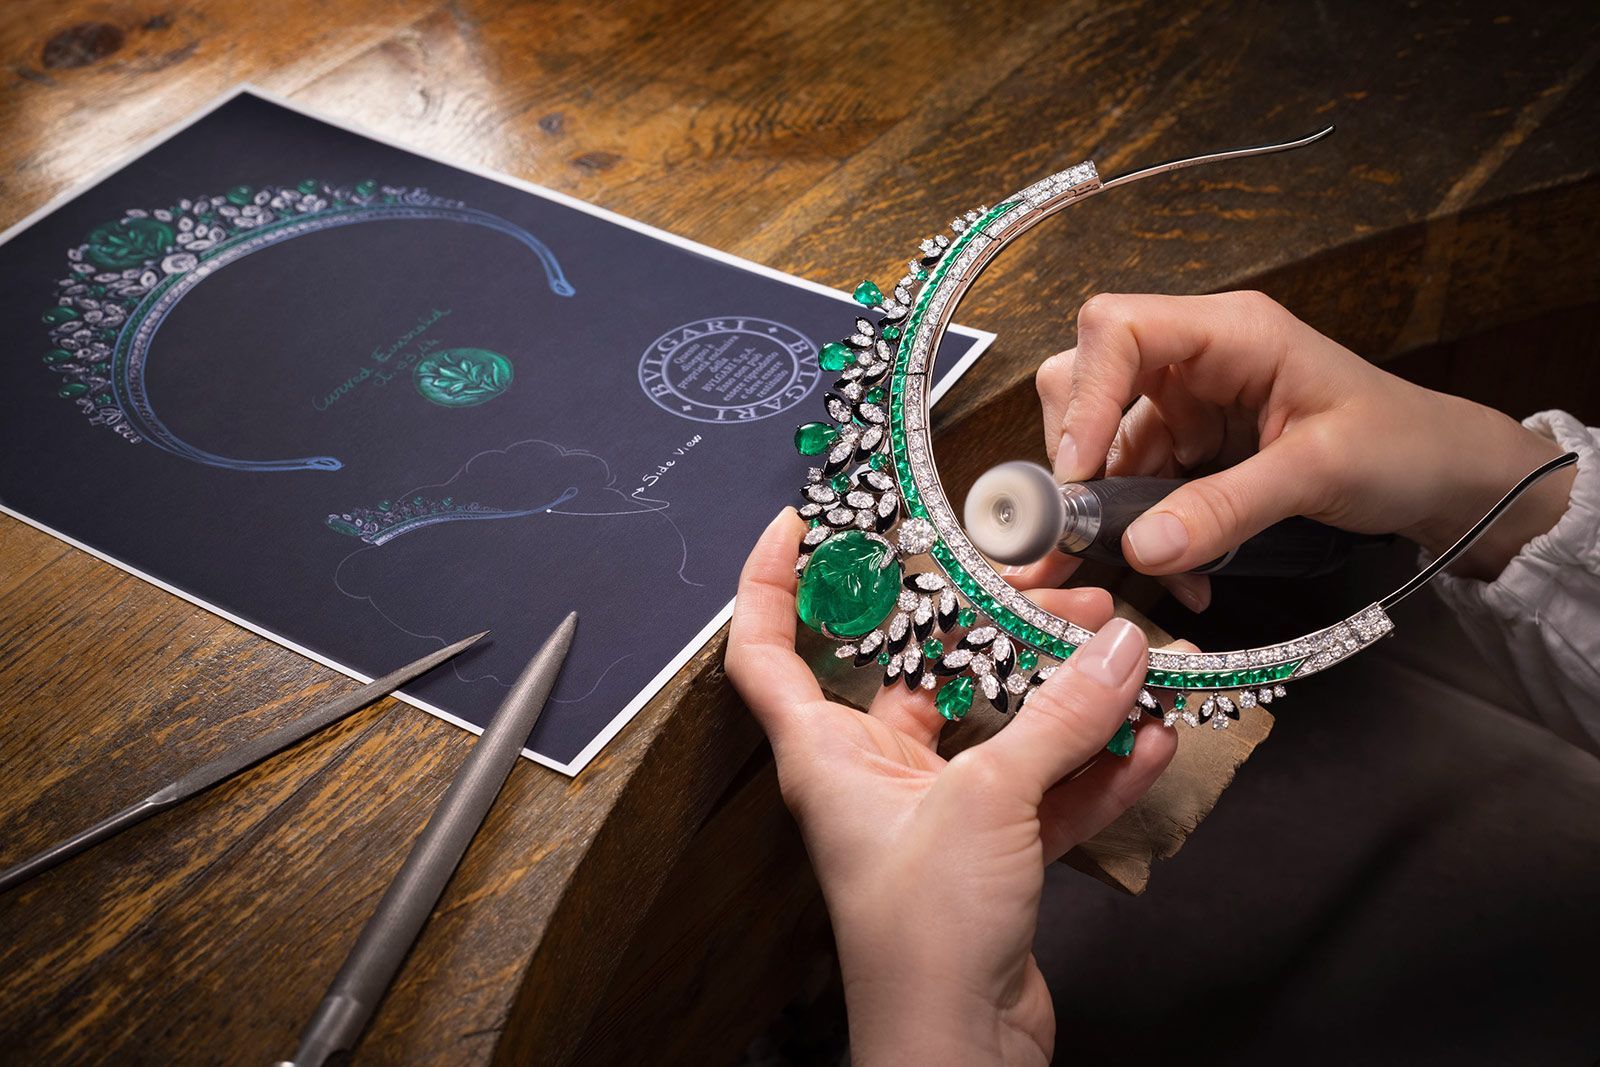 Bulgari Jubilee Emerald Garden tiara with 63.44 carats of Zambian emeralds from the Eden The Garden of Wonders High Jewellery collection